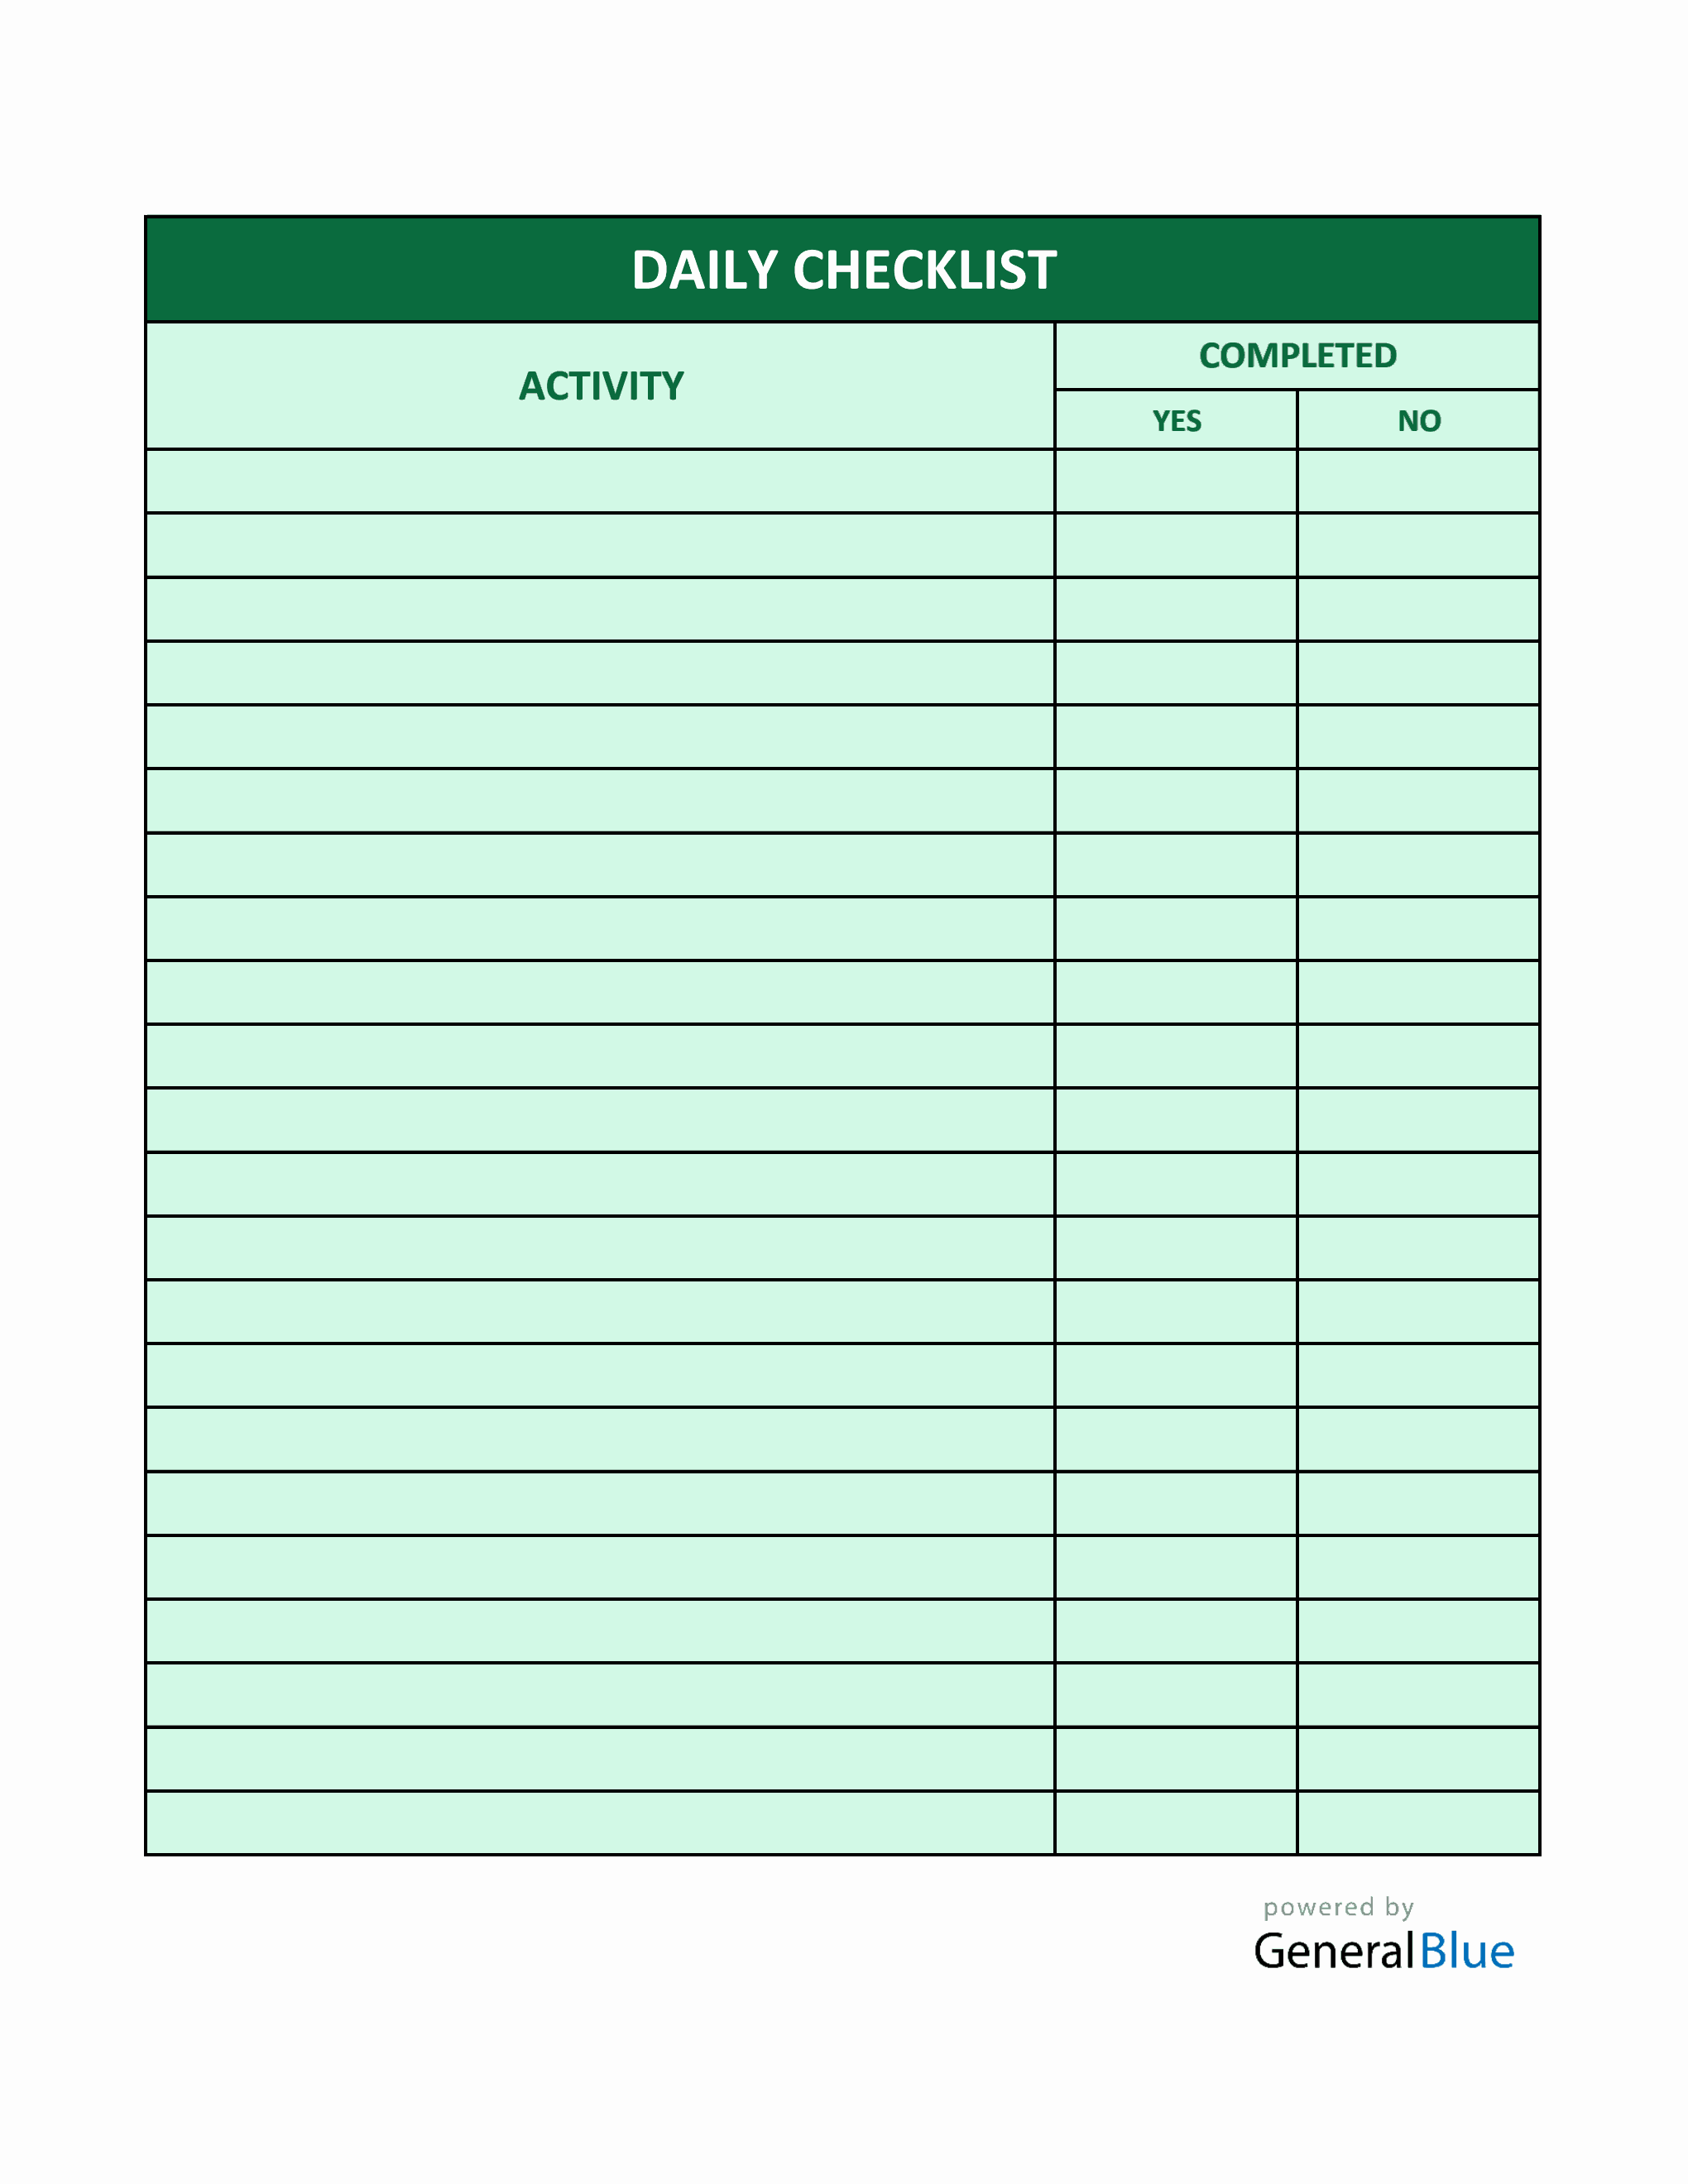 excel shopping list template